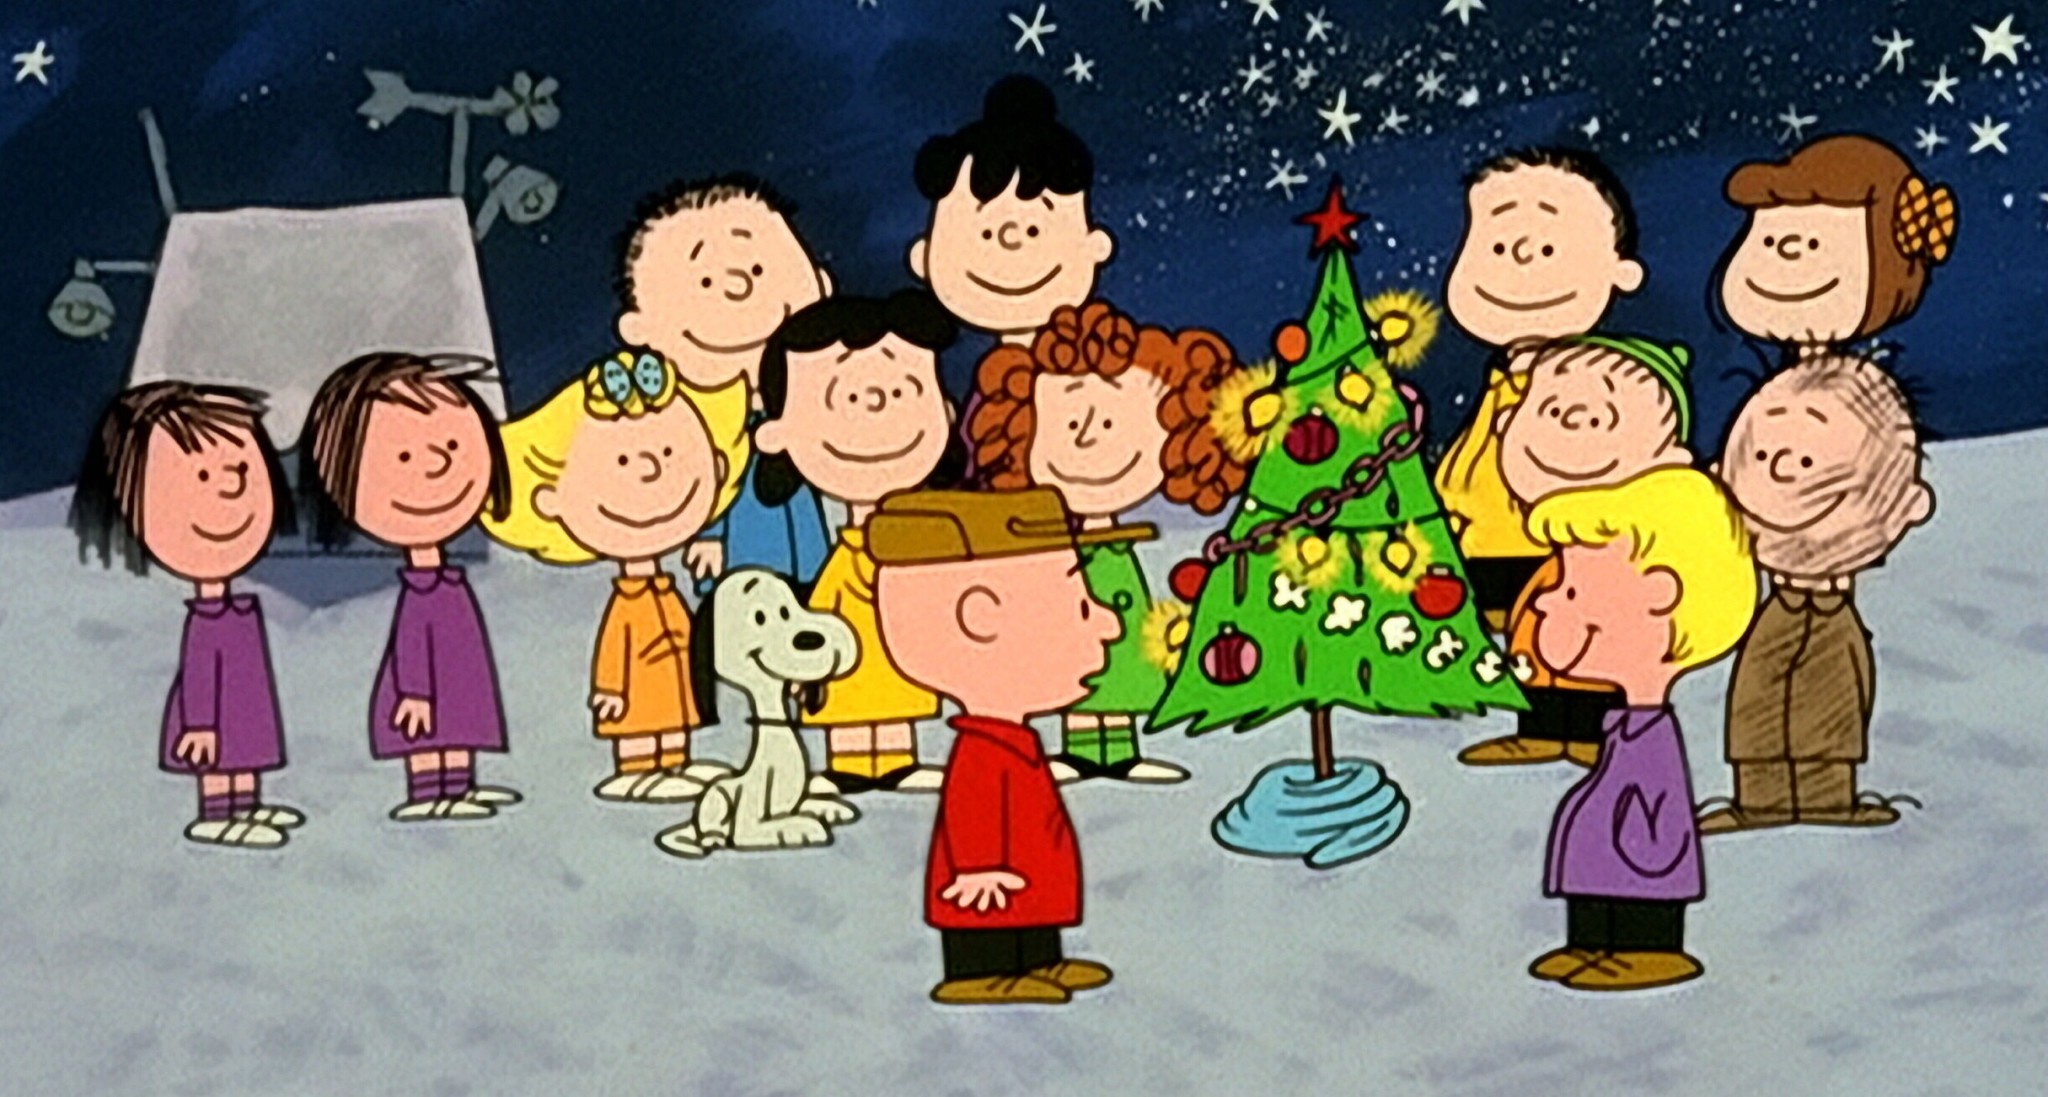 How to Watch “A Charlie Brown Christmas” For Free Without Cable This Weekend